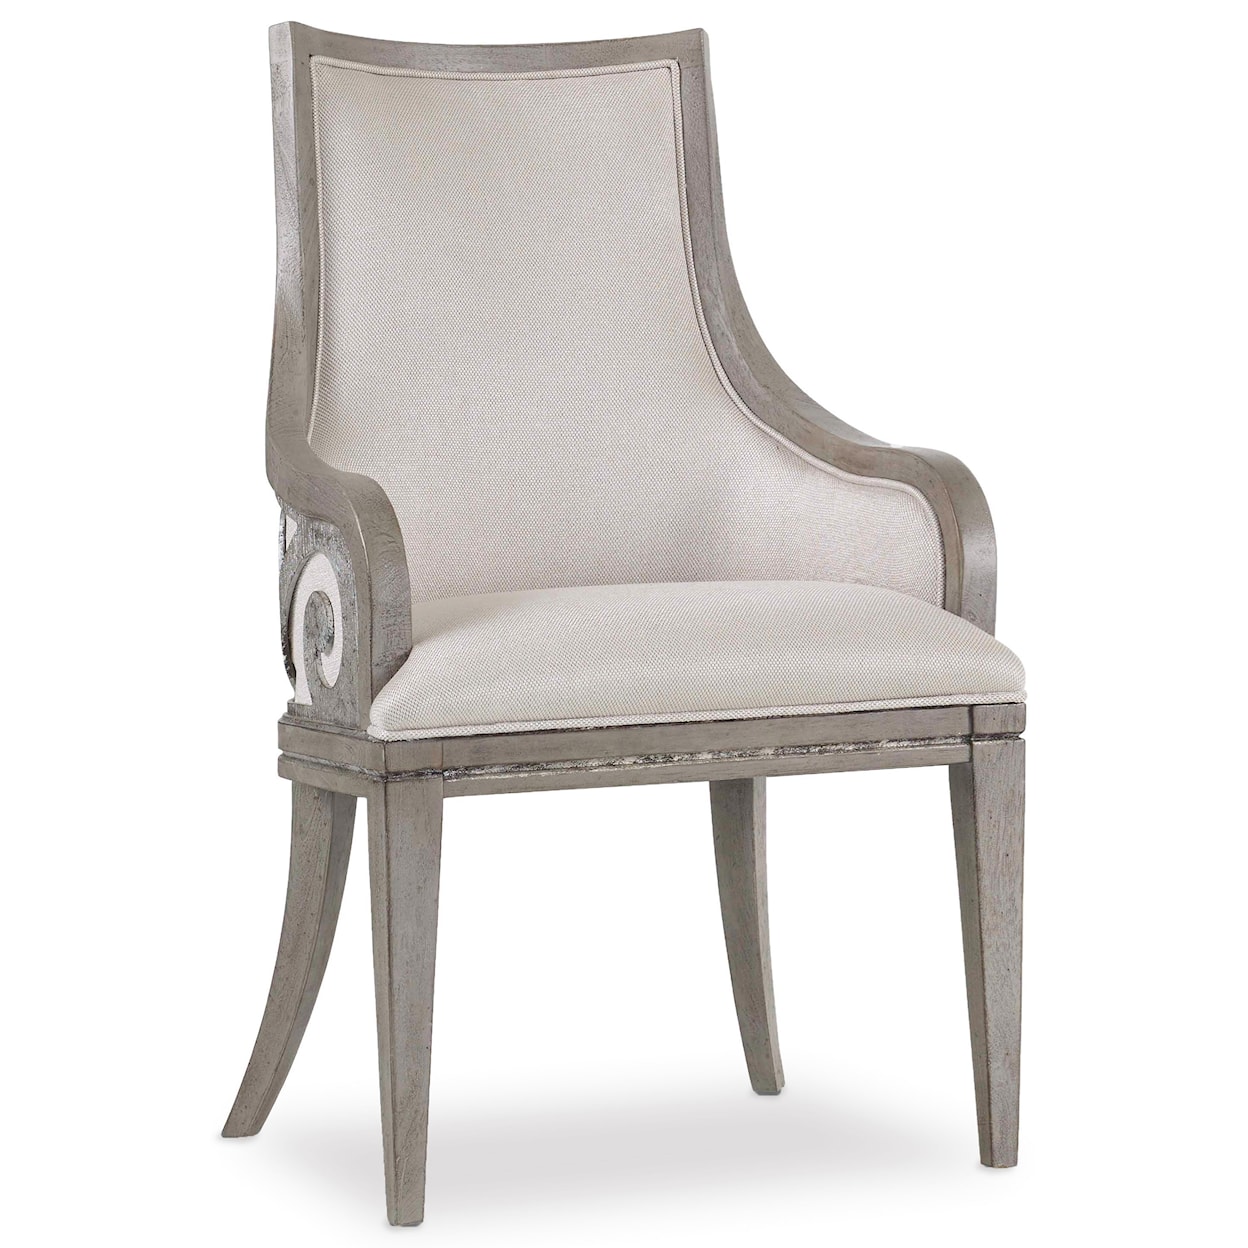 Hooker Furniture Sanctuary Upholstered Arm Chair